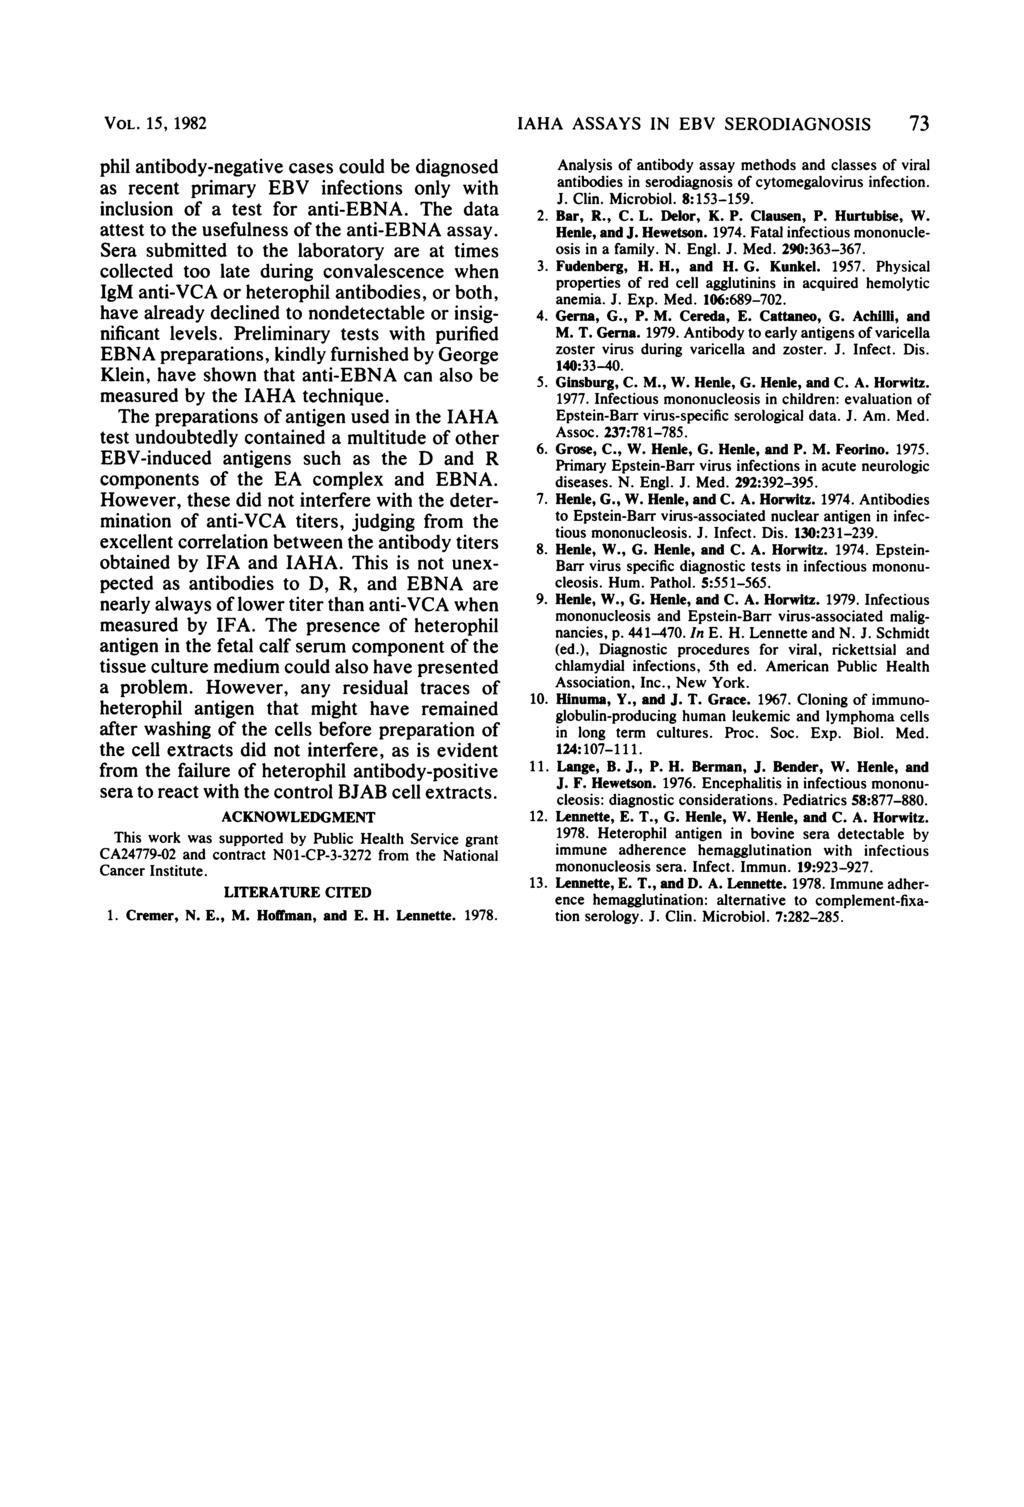 VOL. 15, 1982 phil antibody-negative cases could be diagnosed as recent primary EBV infections only with inclusion of a test for anti-ebna. The data attest to the usefulness of the anti-ebna assay.